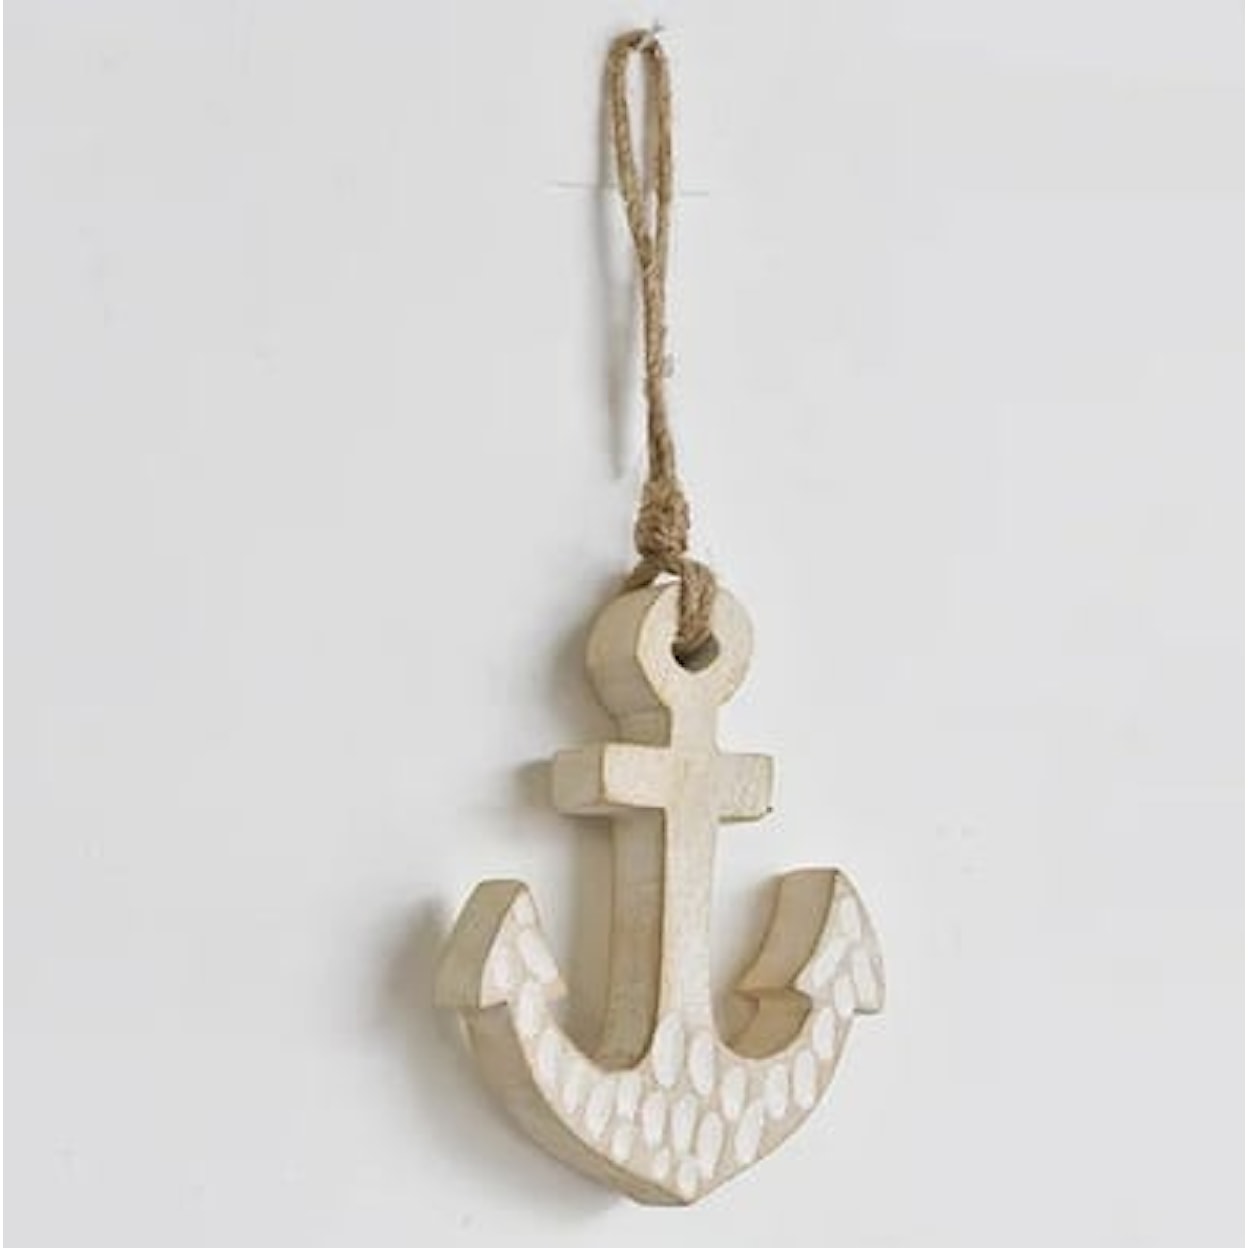 PD Home & Garden Wall Decor Hanging Carved Wood Anchor - Small